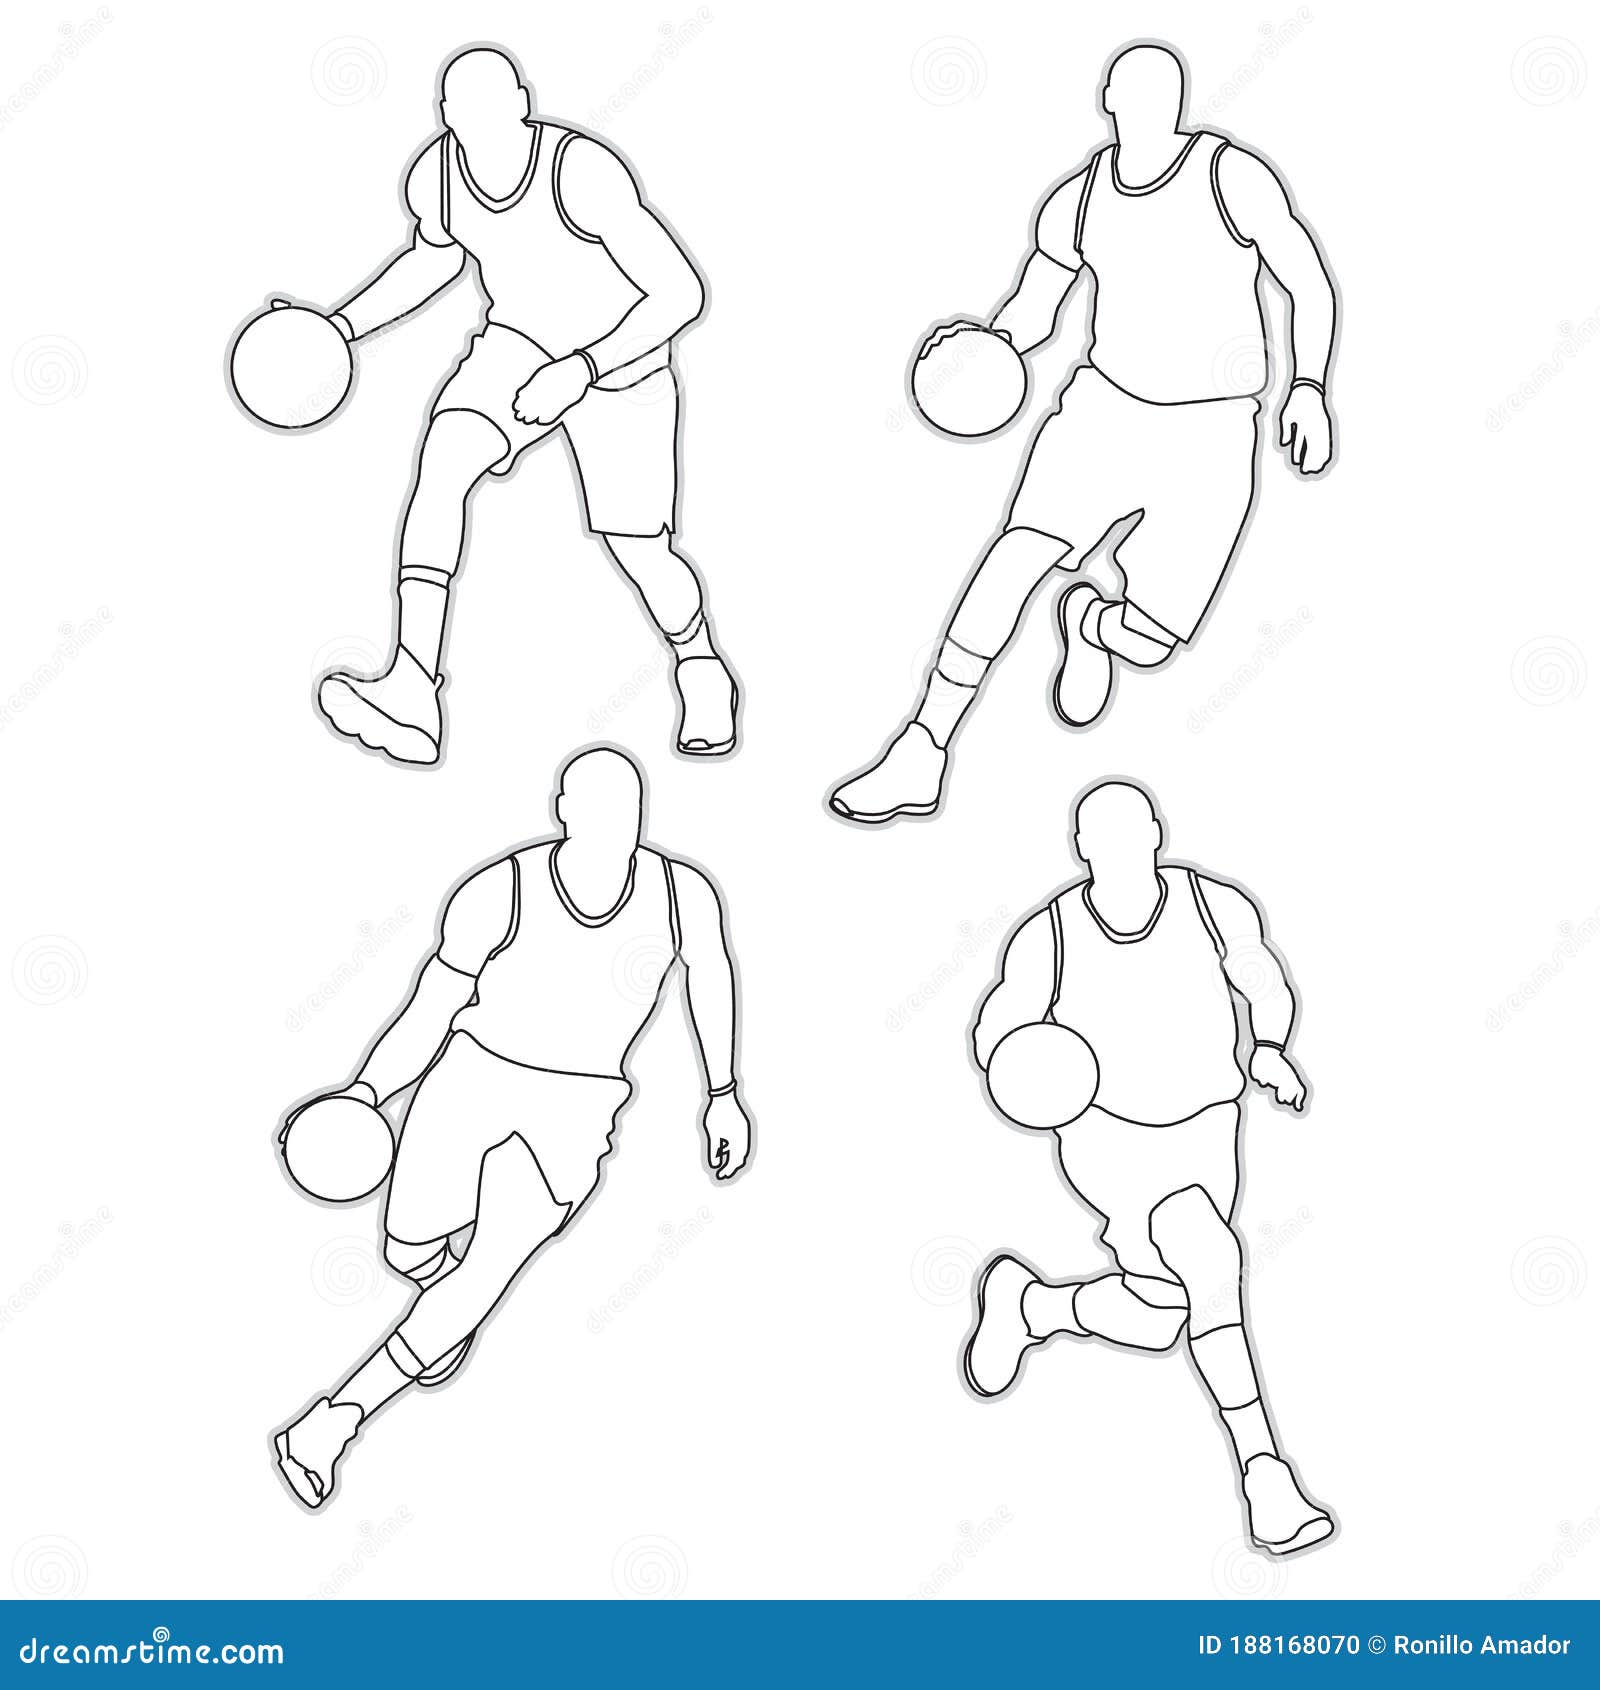 Soccer characters in different action poses Vector Image